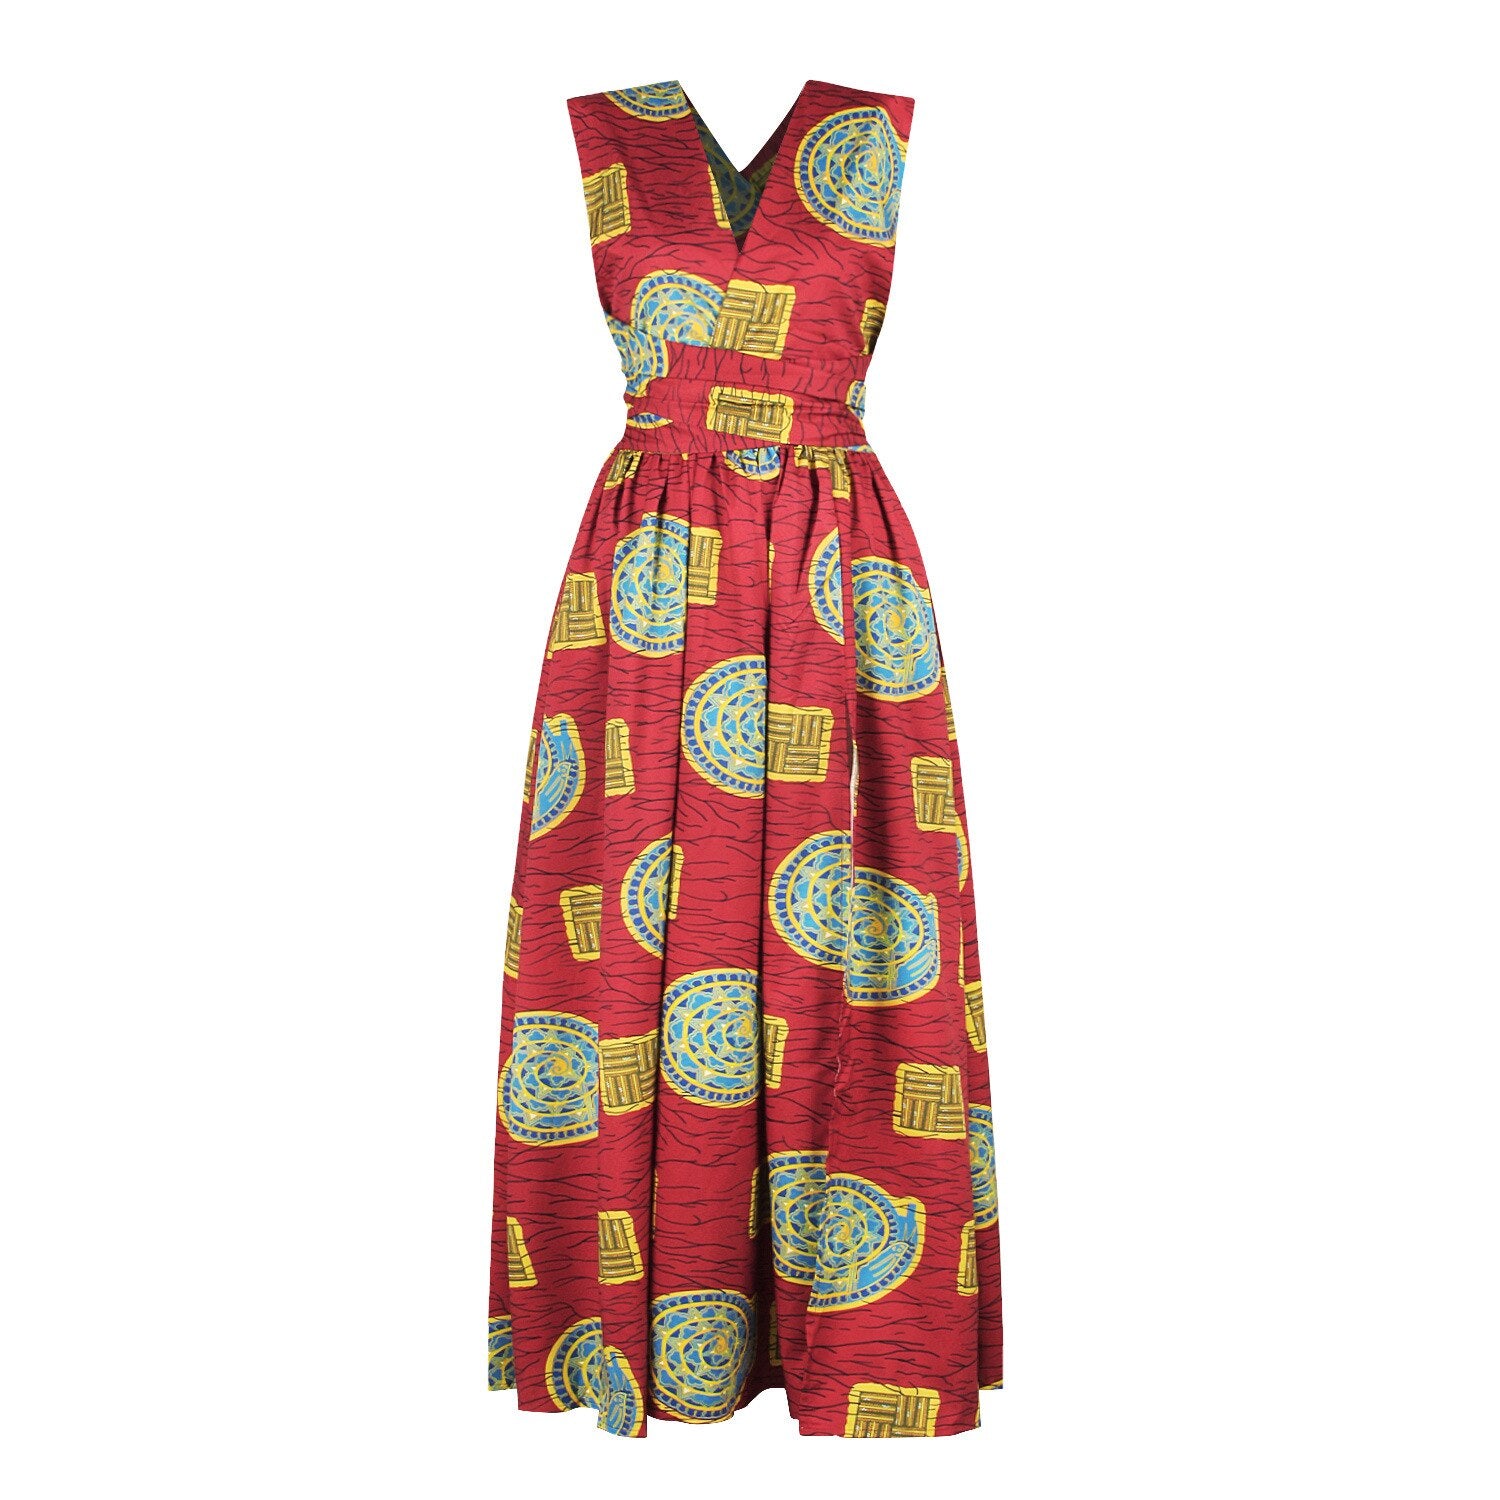 Robe africaine en pagne Wax longue